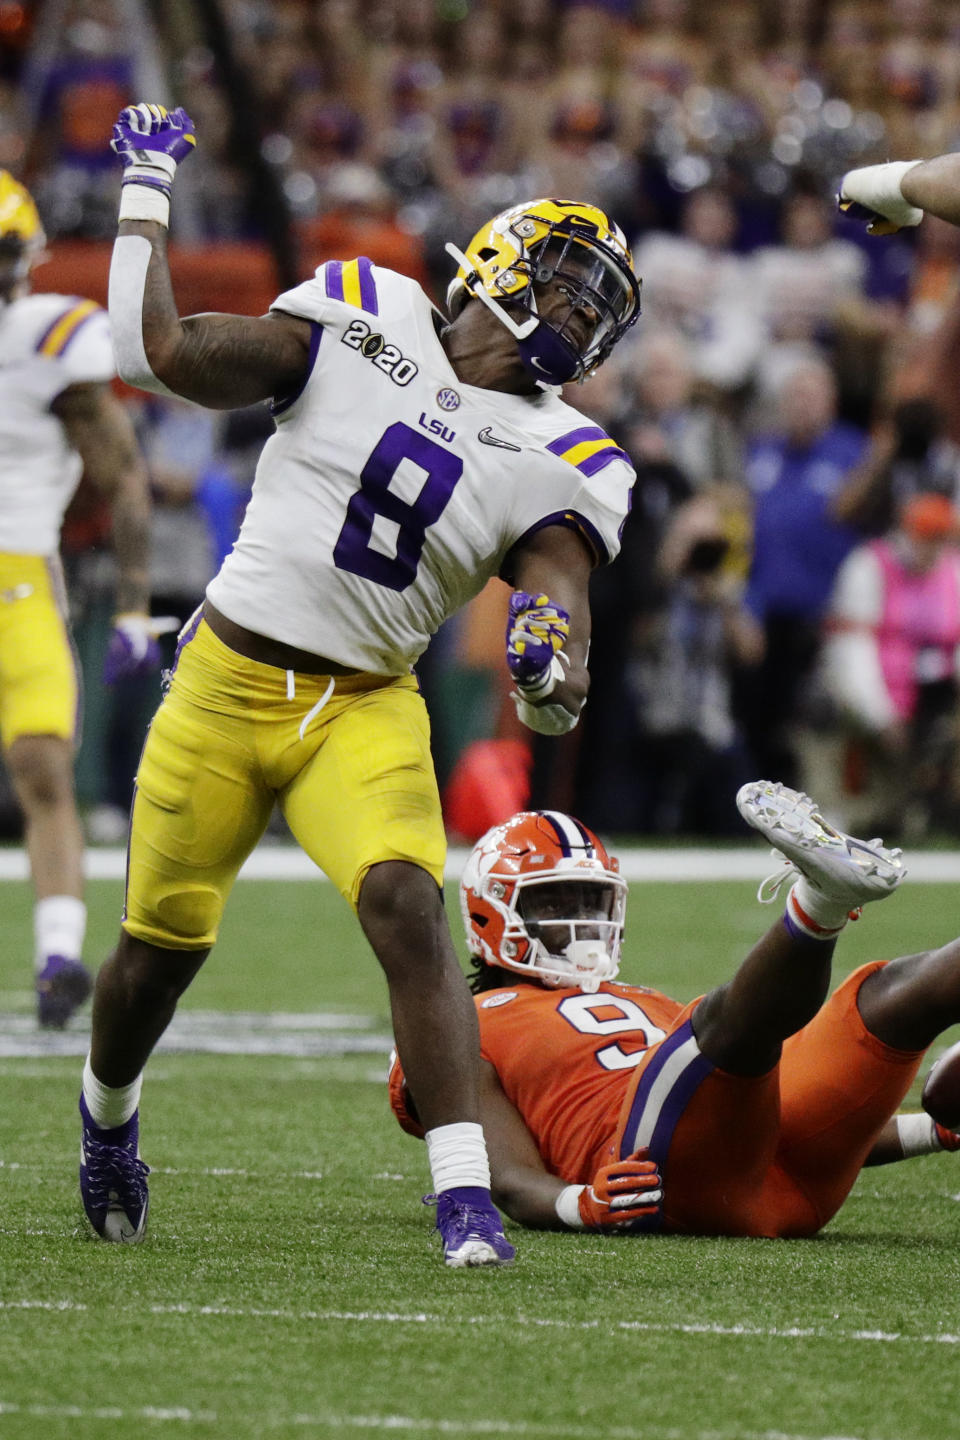 LSU linebacker Patrick Queen celebrates after tackling Clemson running back Travis Etienne during the second half of a NCAA College Football Playoff national championship game Monday, Jan. 13, 2020, in New Orleans. (AP Photo/Sue Ogrocki)